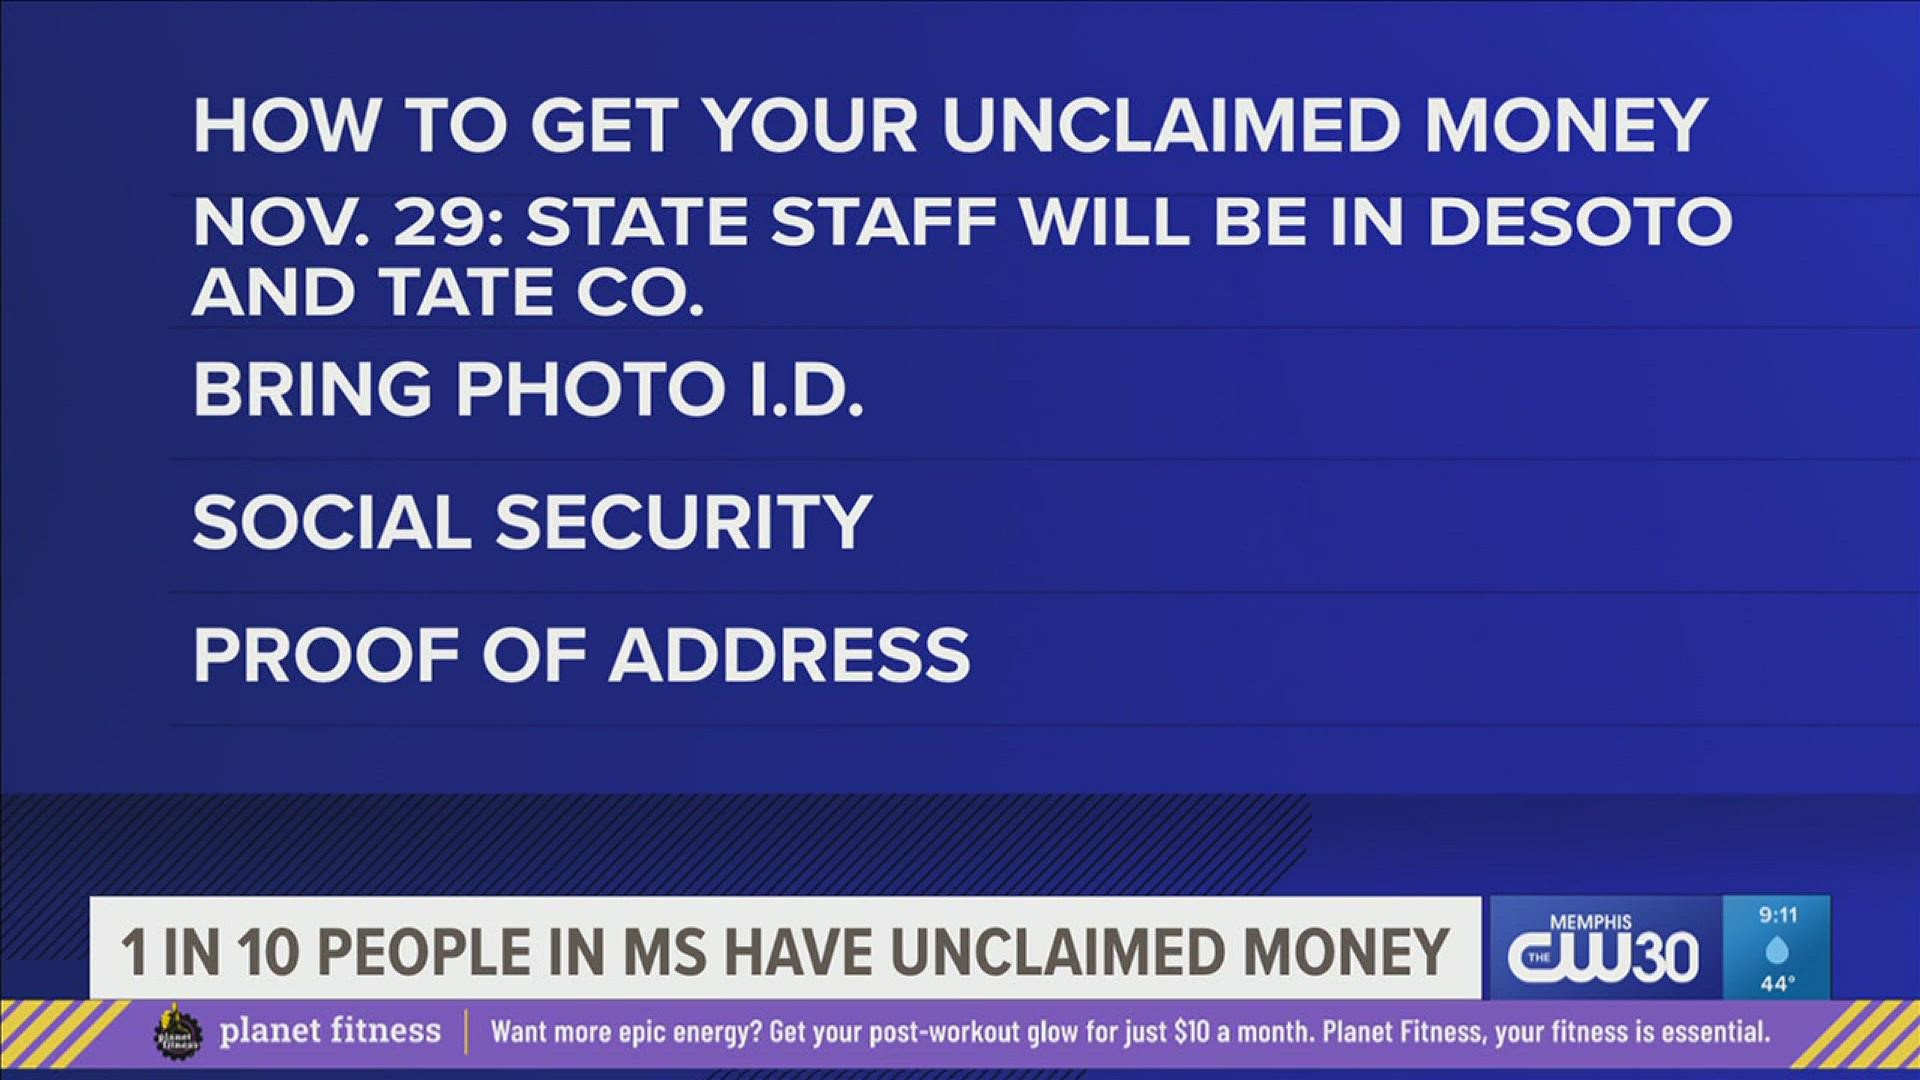 Staff from the State Treasurer's office will be in DeSoto and Tate counties to help people search the state's unclaimed money list and begin the claims process.